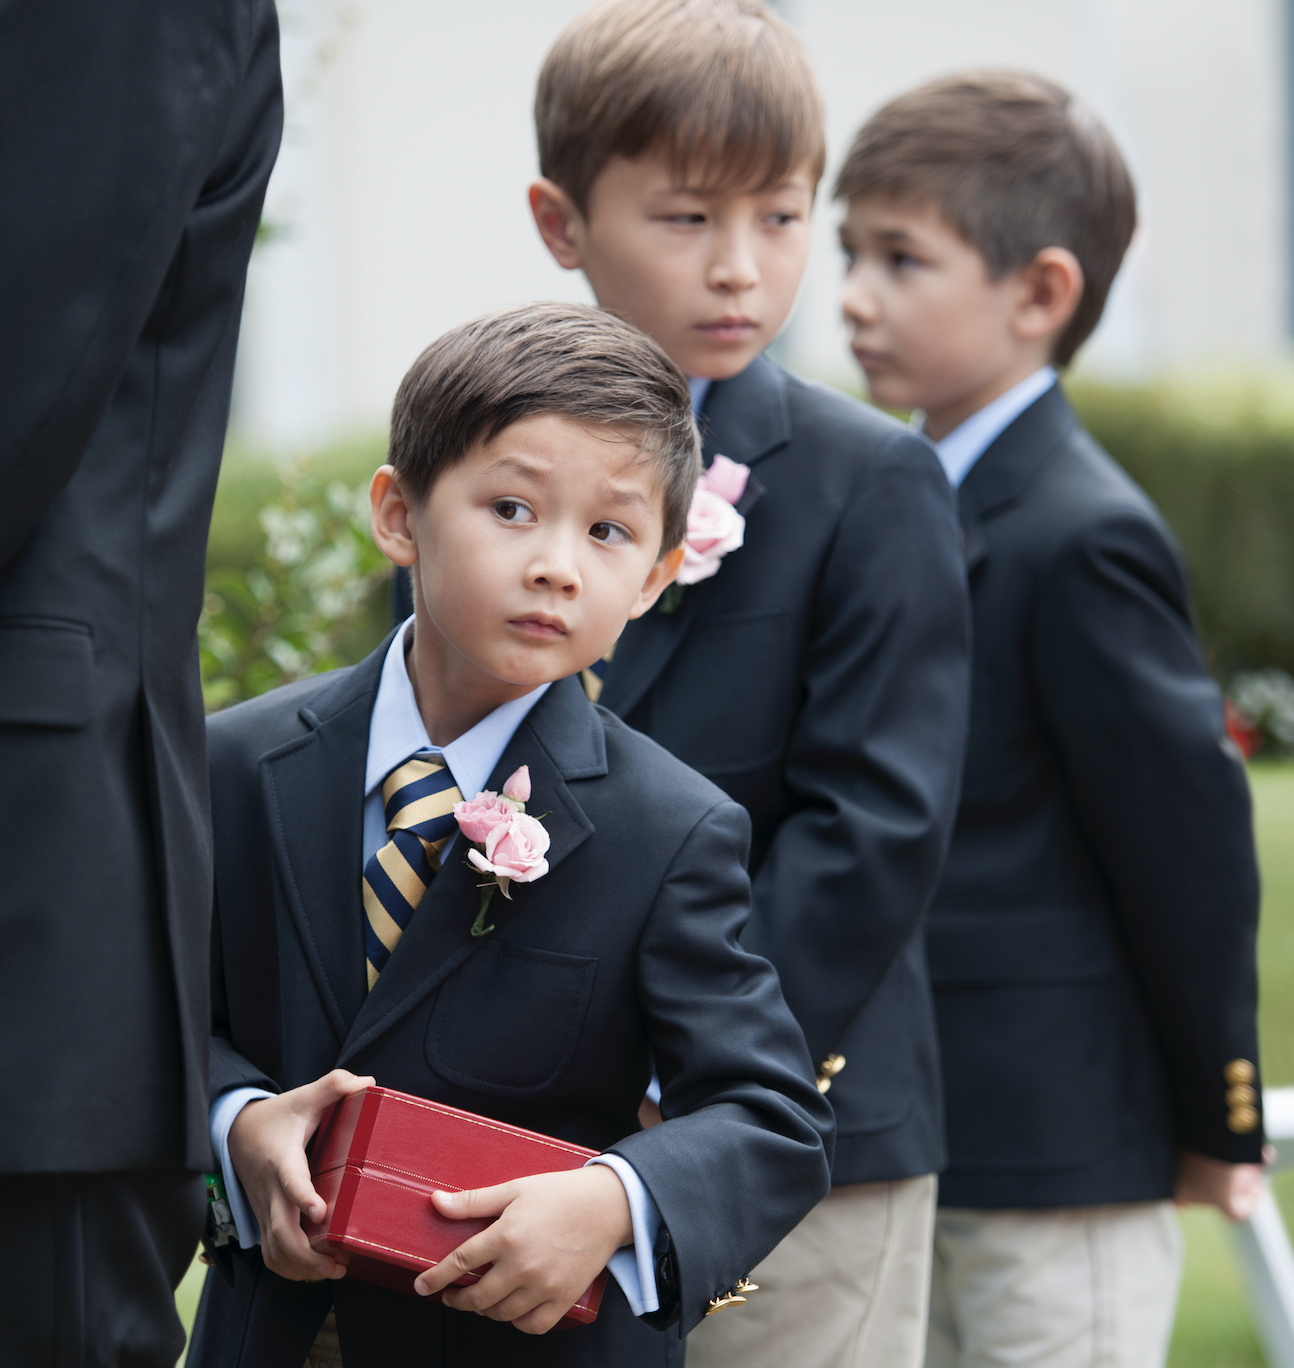 Young boys, including the ring bearer, at a wedding